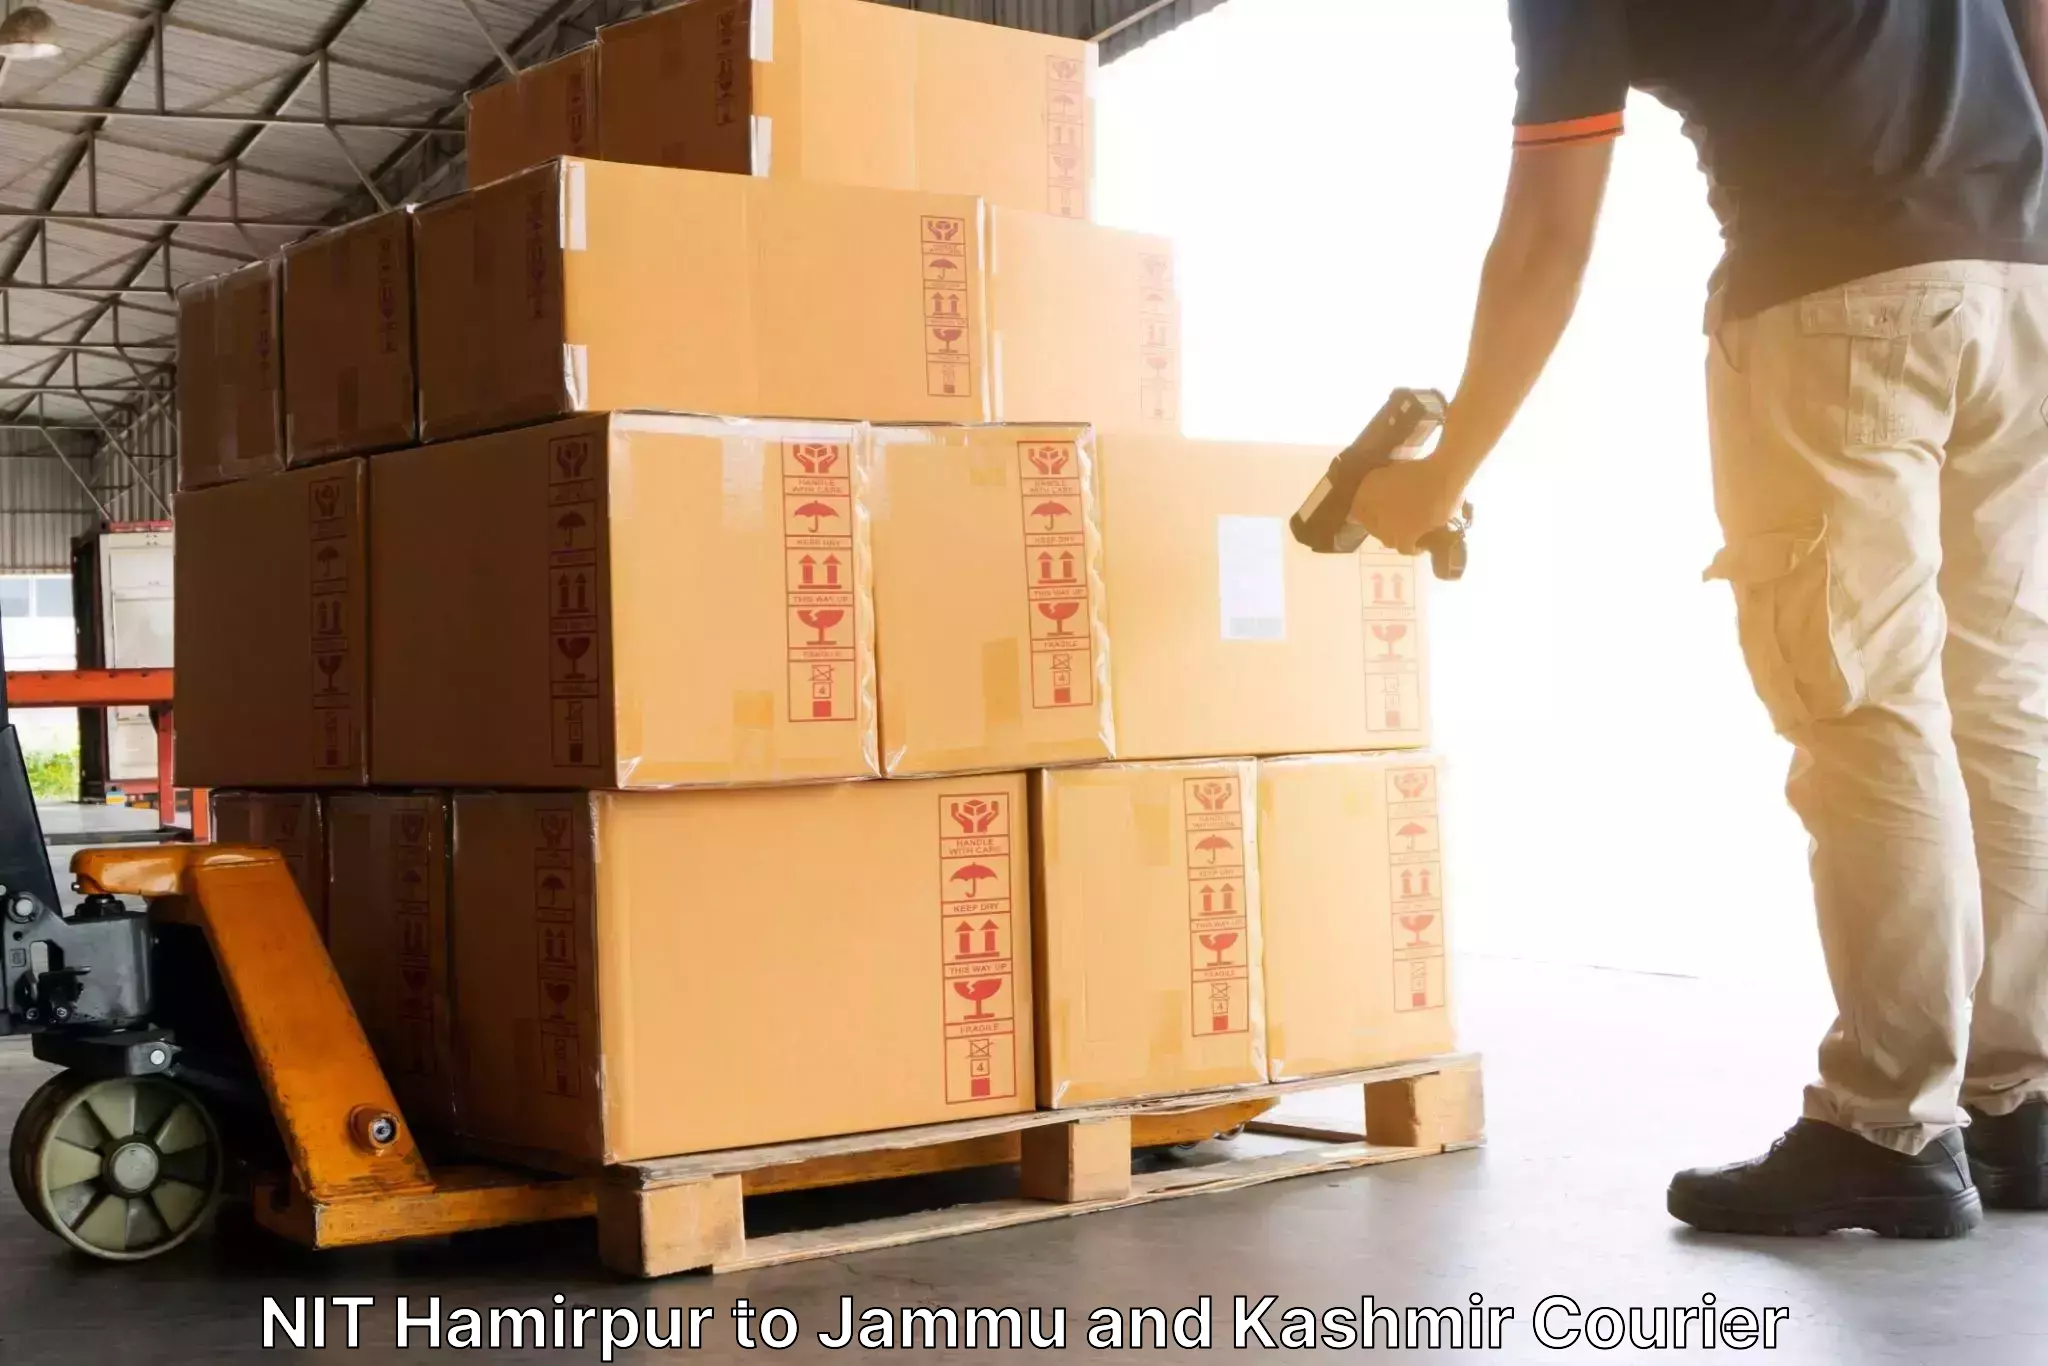 Nationwide shipping capabilities in NIT Hamirpur to Jammu